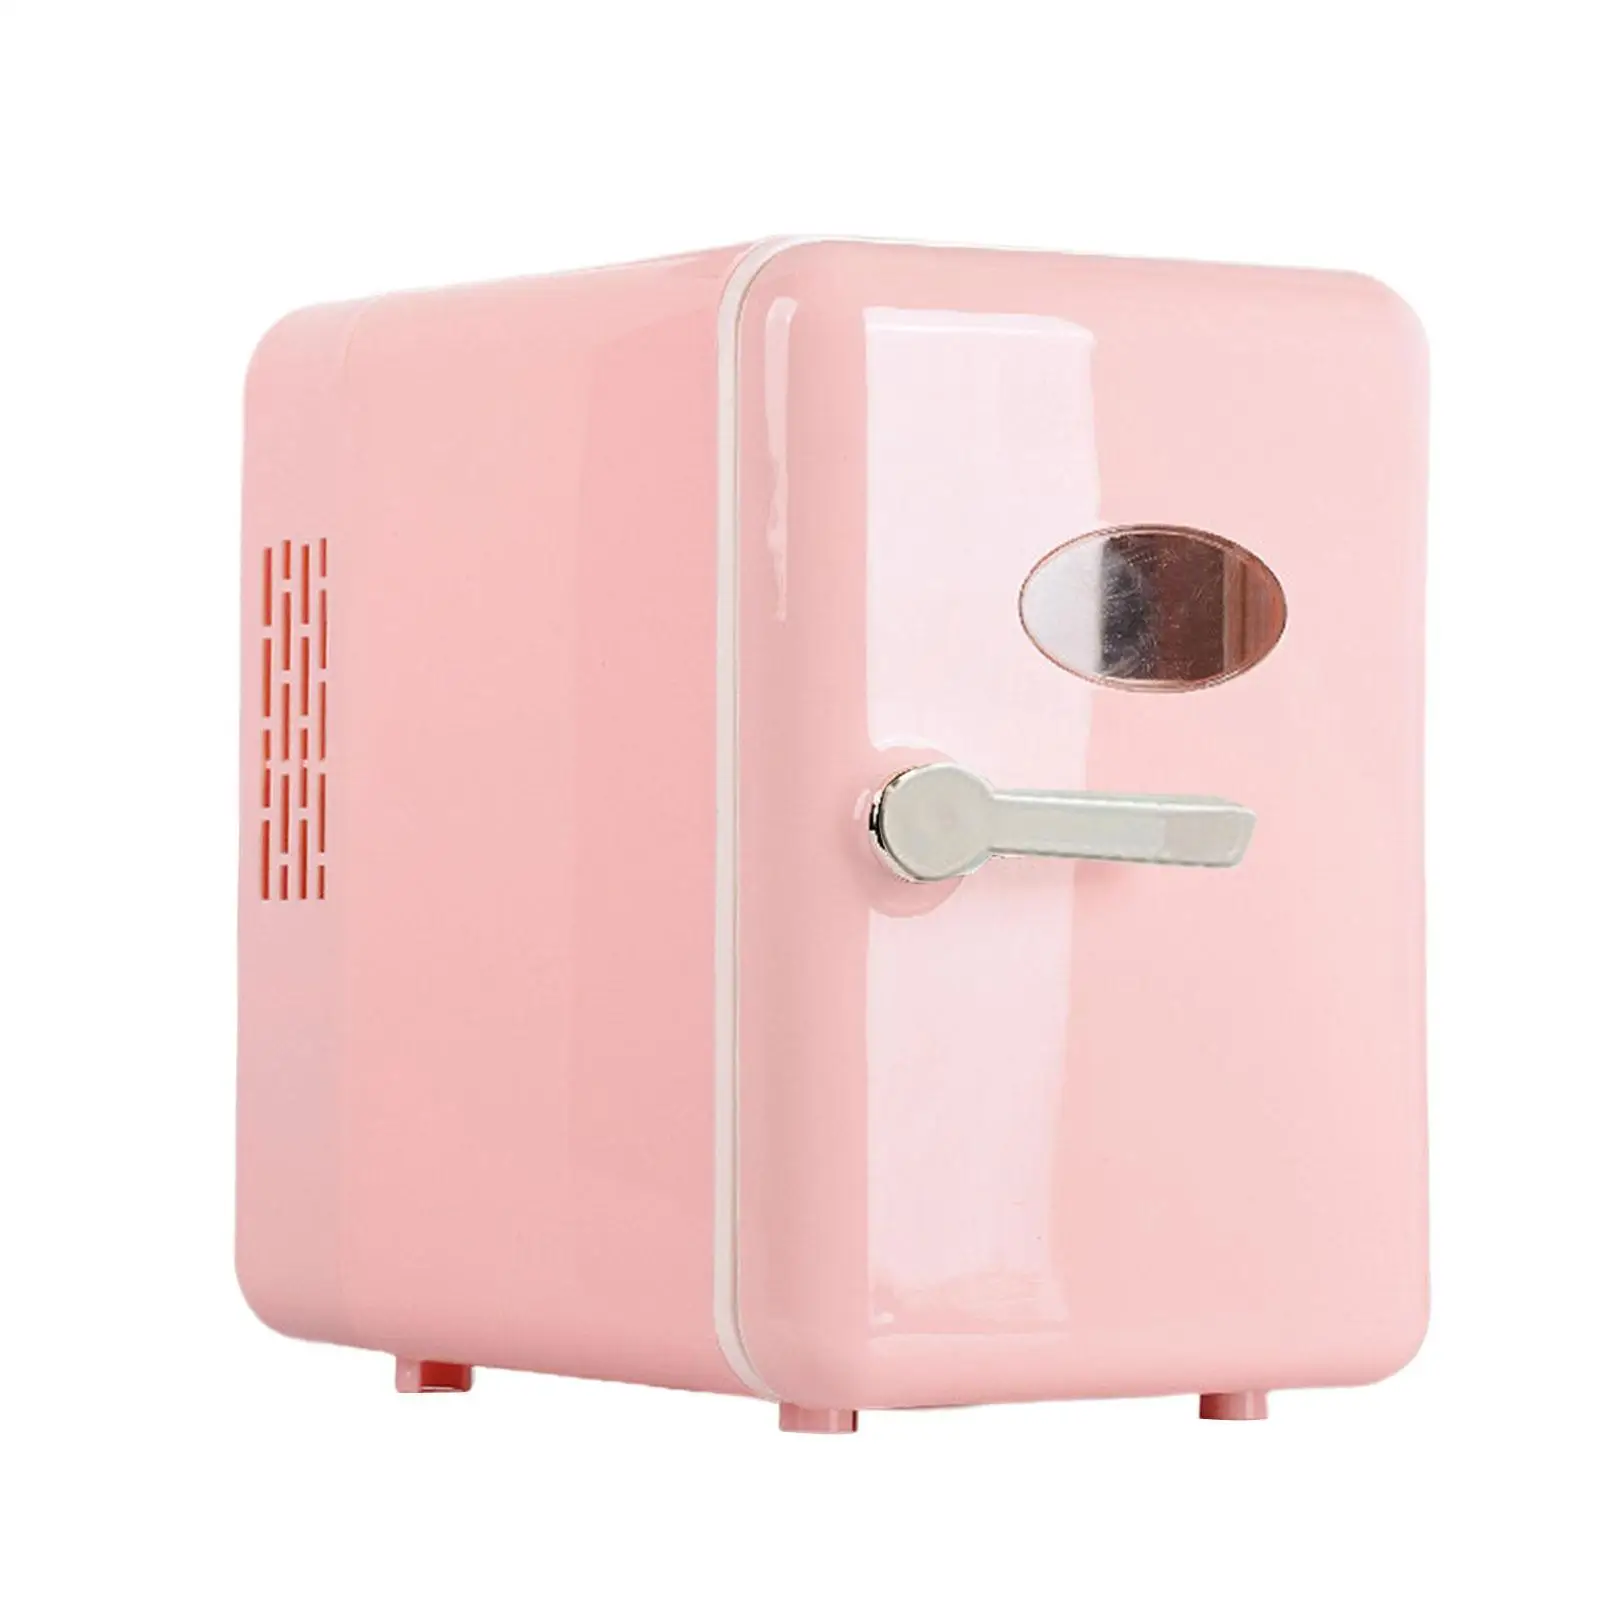 

6L Skincare Mini Fridge Portable Refrigerator UK 220V Pink Desktop Accessory Sturdy Cute for Storing Small Food Items and Drinks